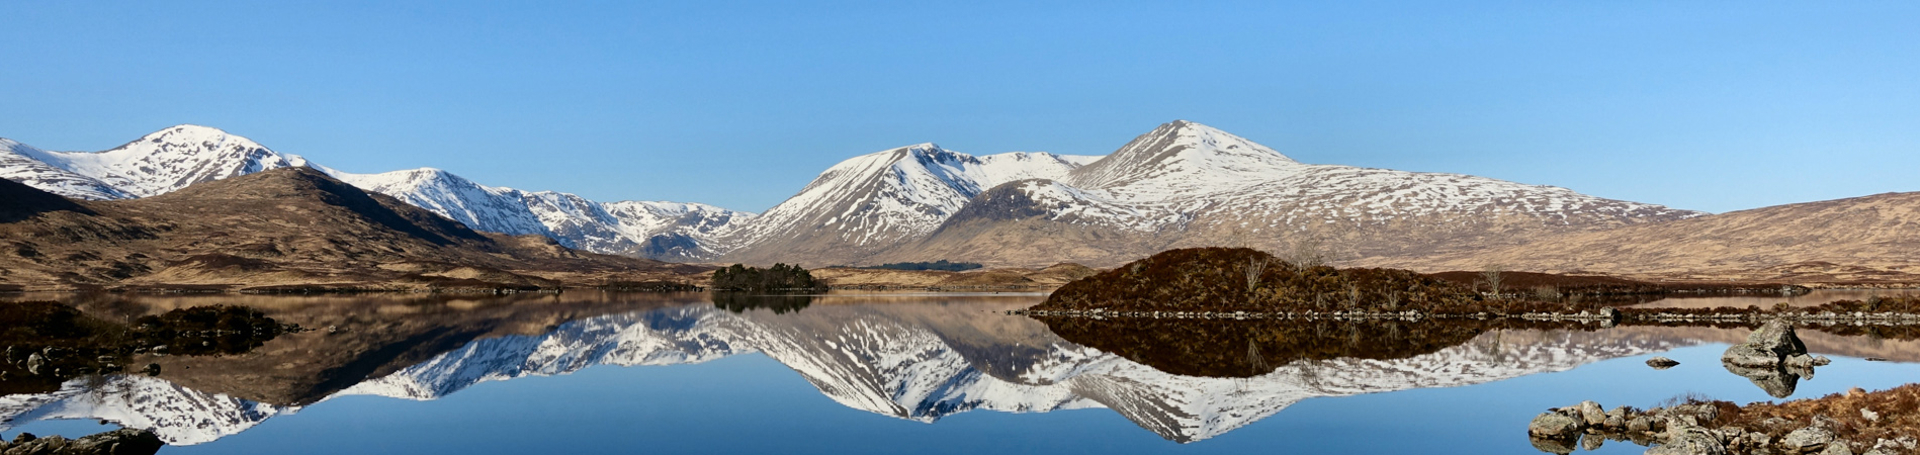 Gorgeous views across Rannoch Moor when travelling with Lochs and Glens luxury coach holidays 